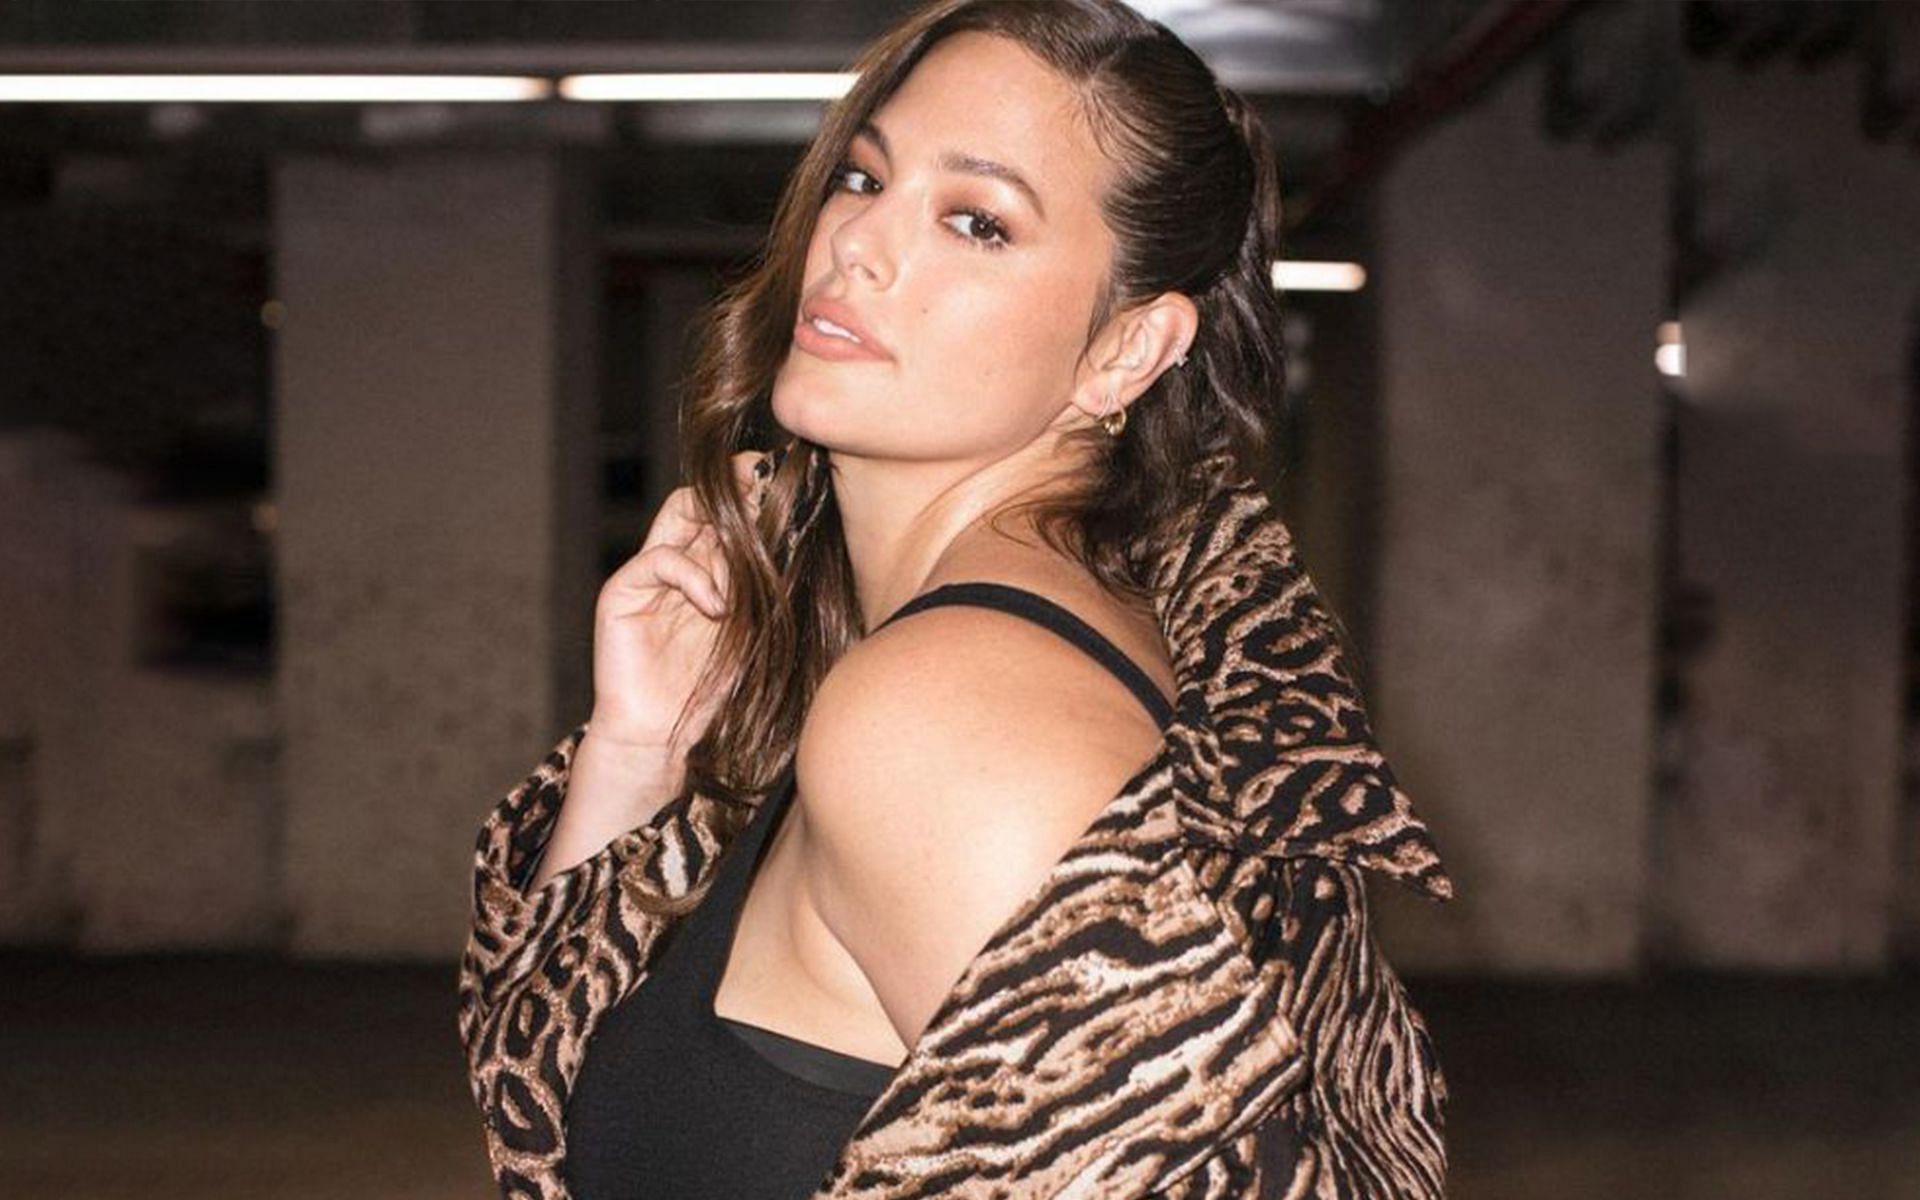 Ashley Graham collaborated with Knix for an intimate apparel collection (Image via Instagram/@ashleygraham)